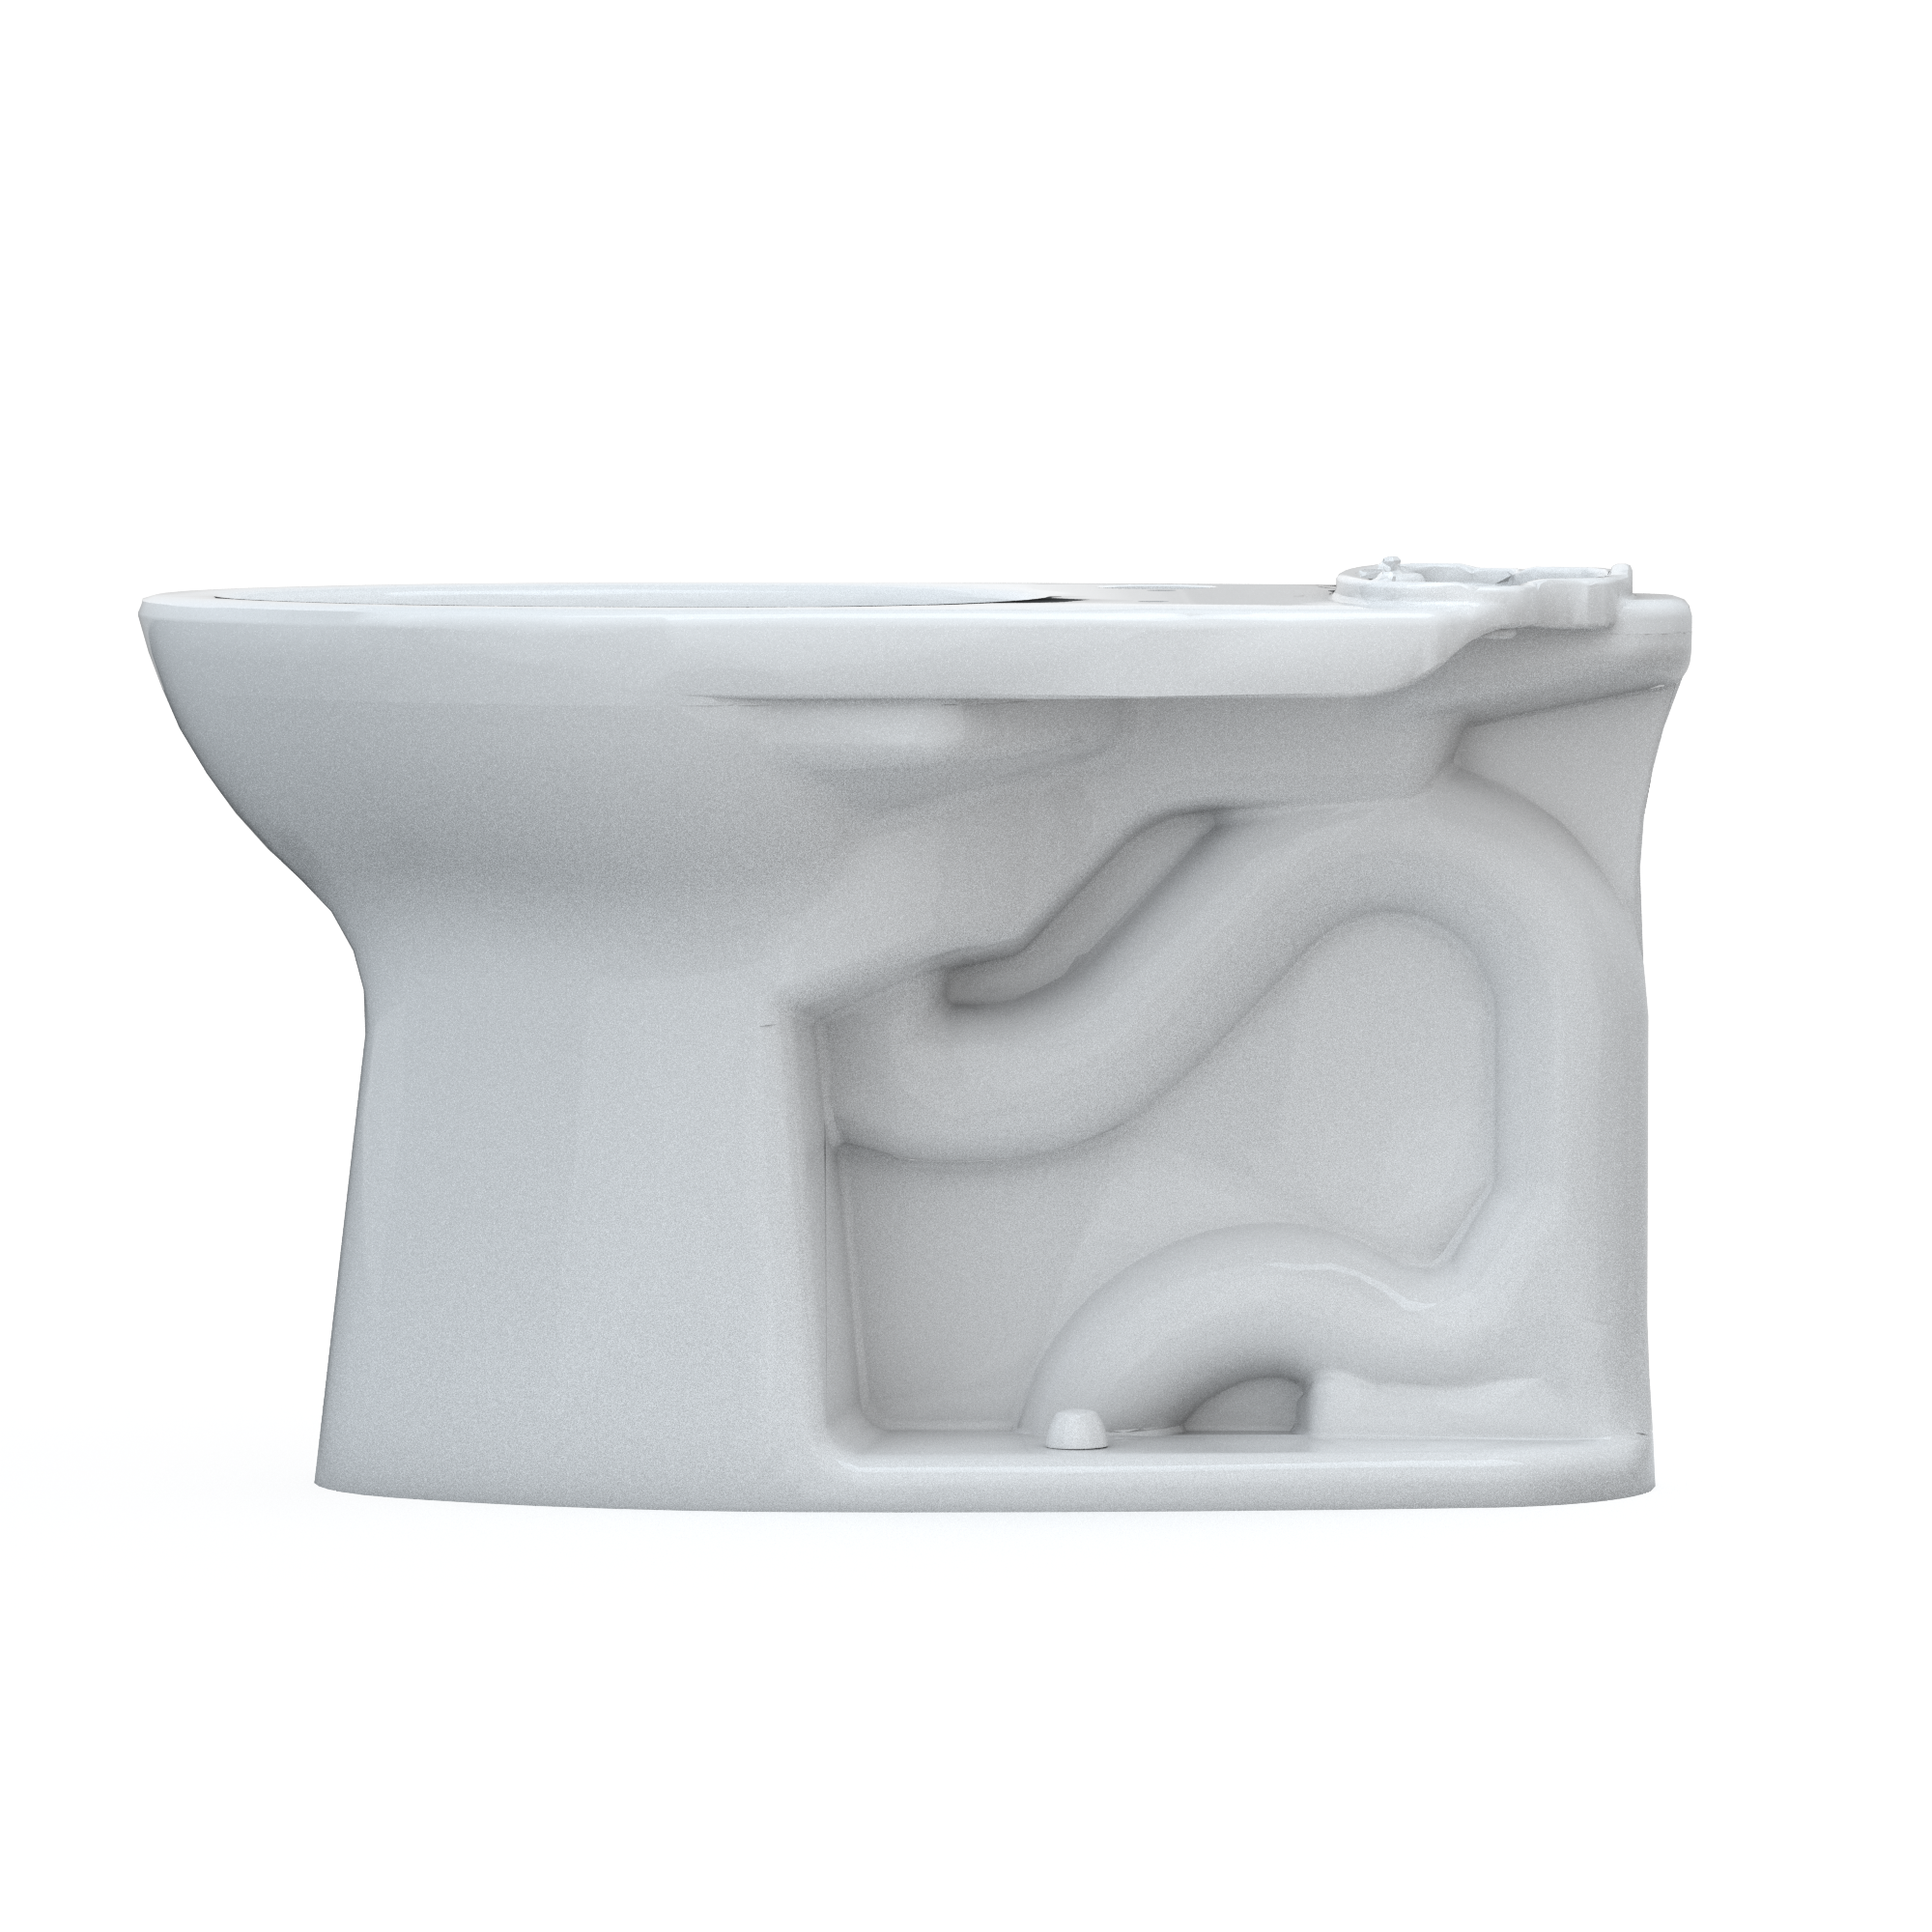 TOTO® Drake® Elongated Universal Height TORNADO FLUSH® Toilet Bowl with CEFIONTECT®, WASHLET®+ Ready, Cotton White - C776CEFGT40#01 - image 5 of 5